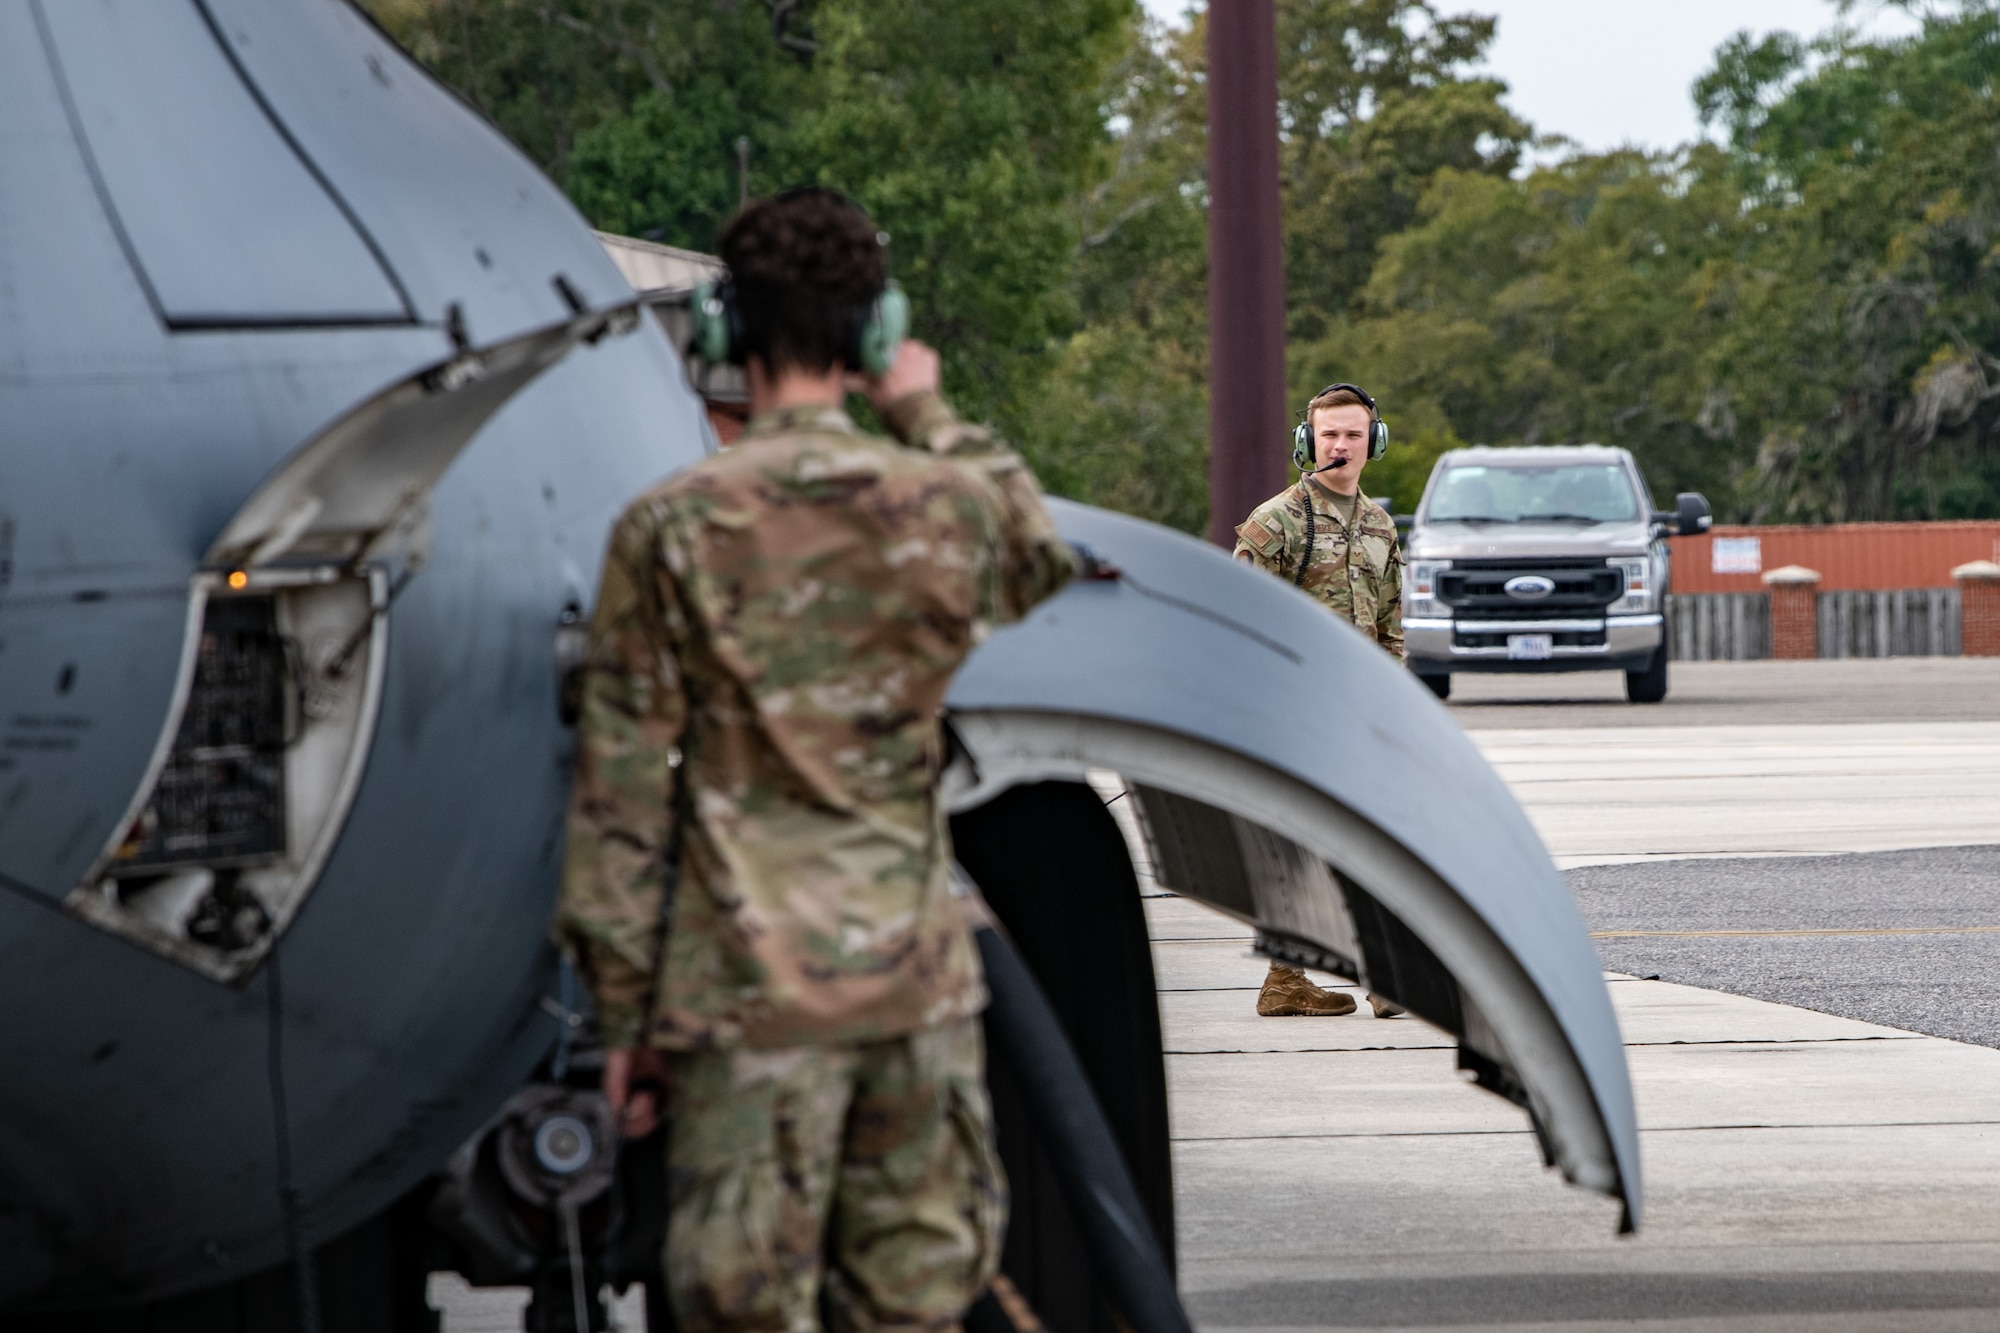 Airmen prepares an aircraft for relocation.